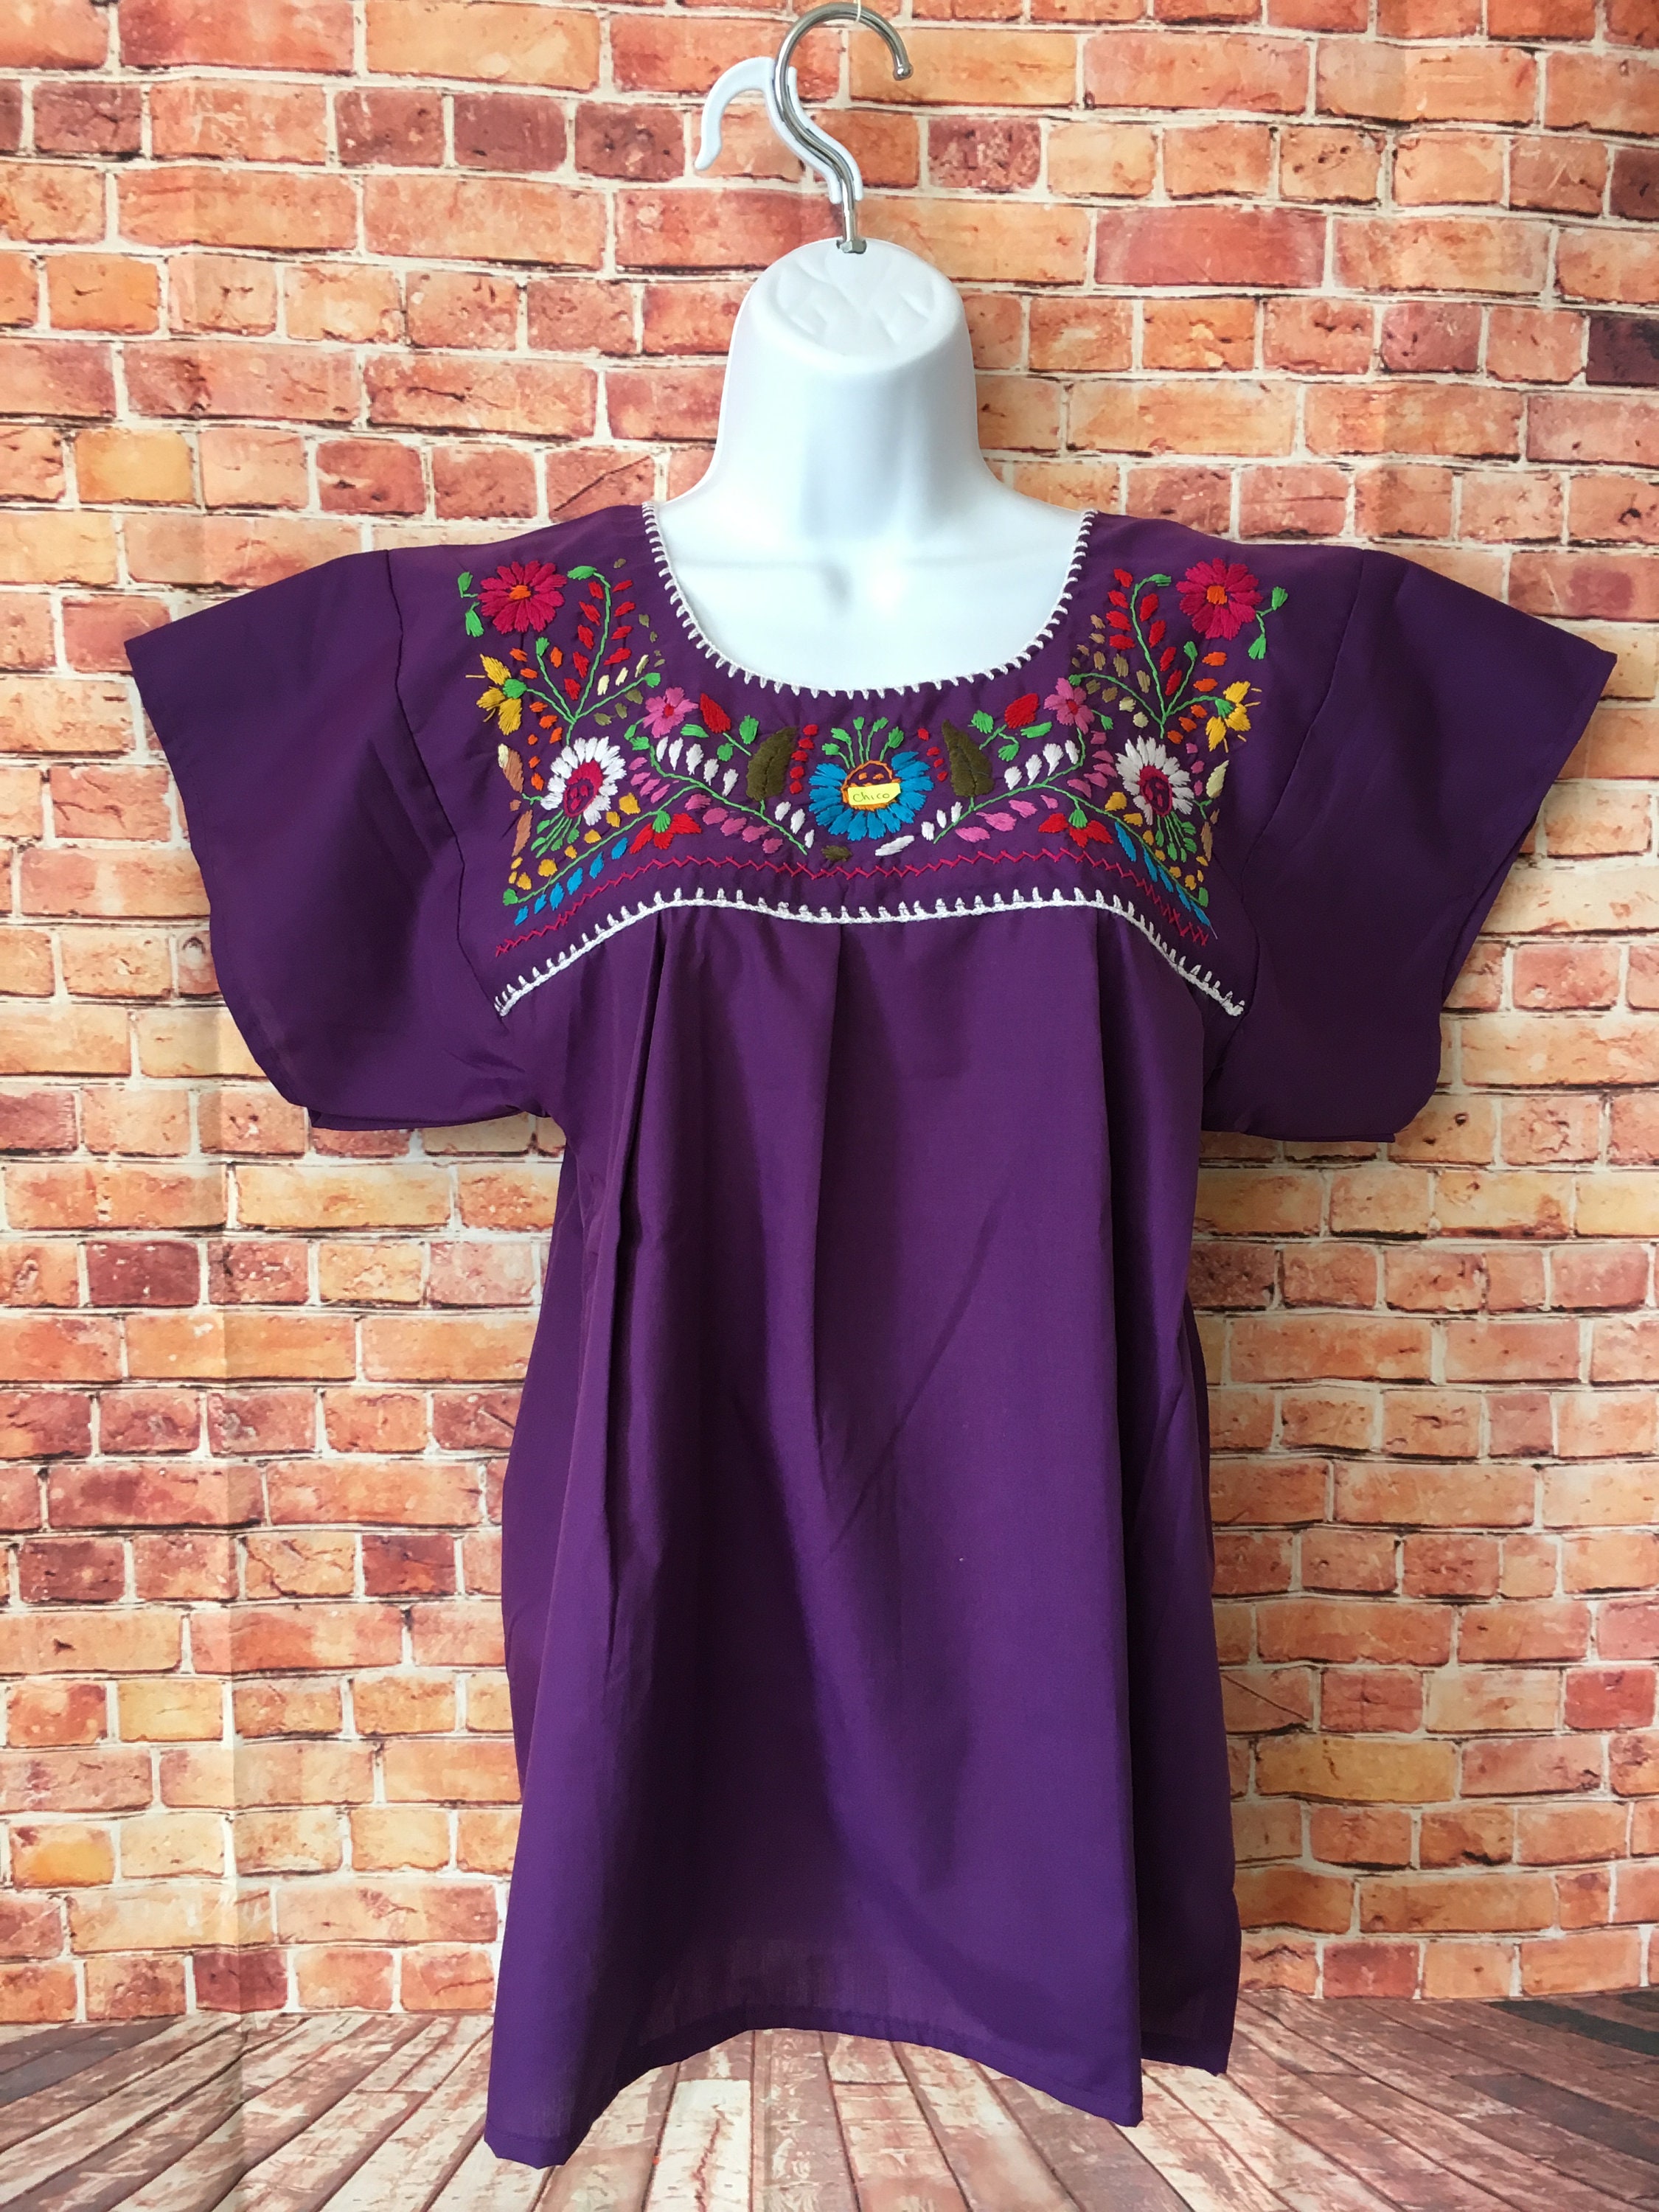 Embroidered Mexican Shirt Small puebla Style - Etsy